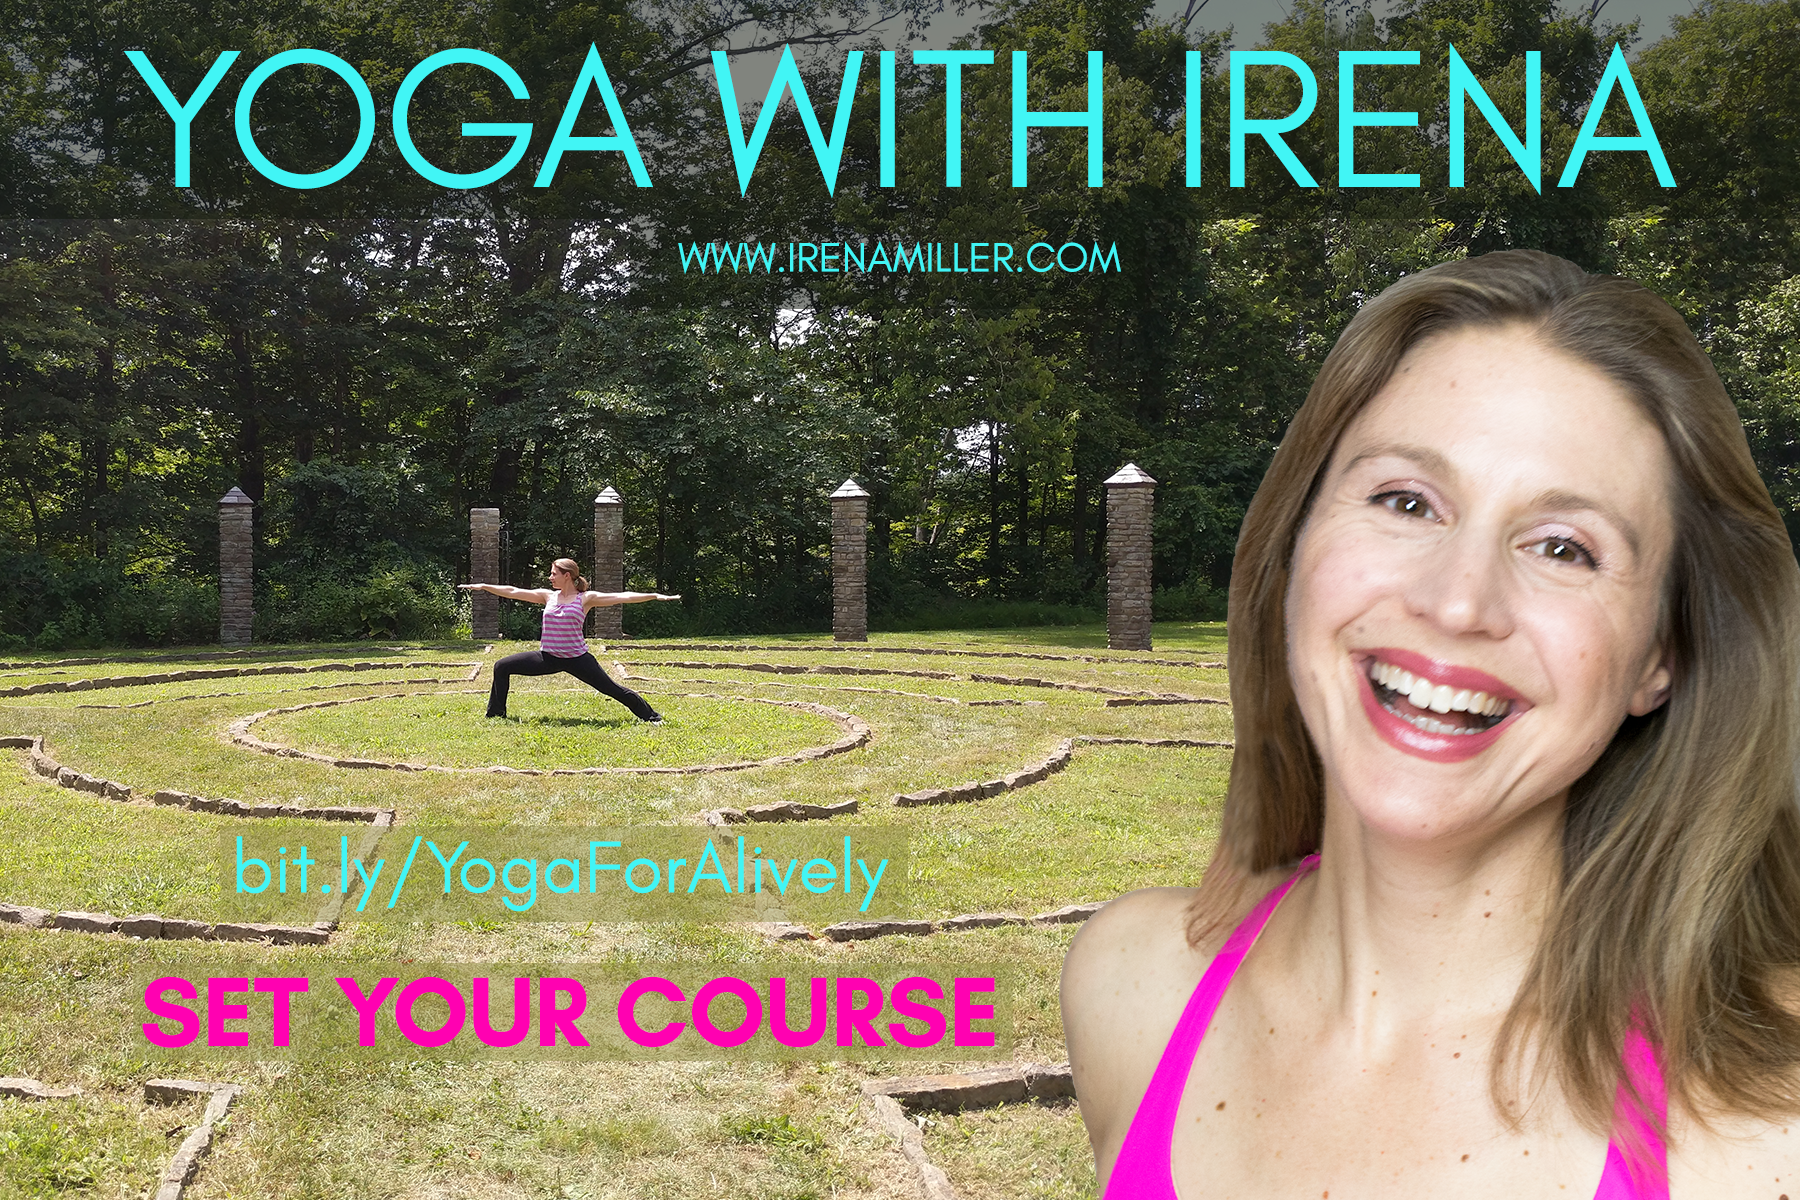 yoga to set your course! Yoga with Irena www.irenamiller.com